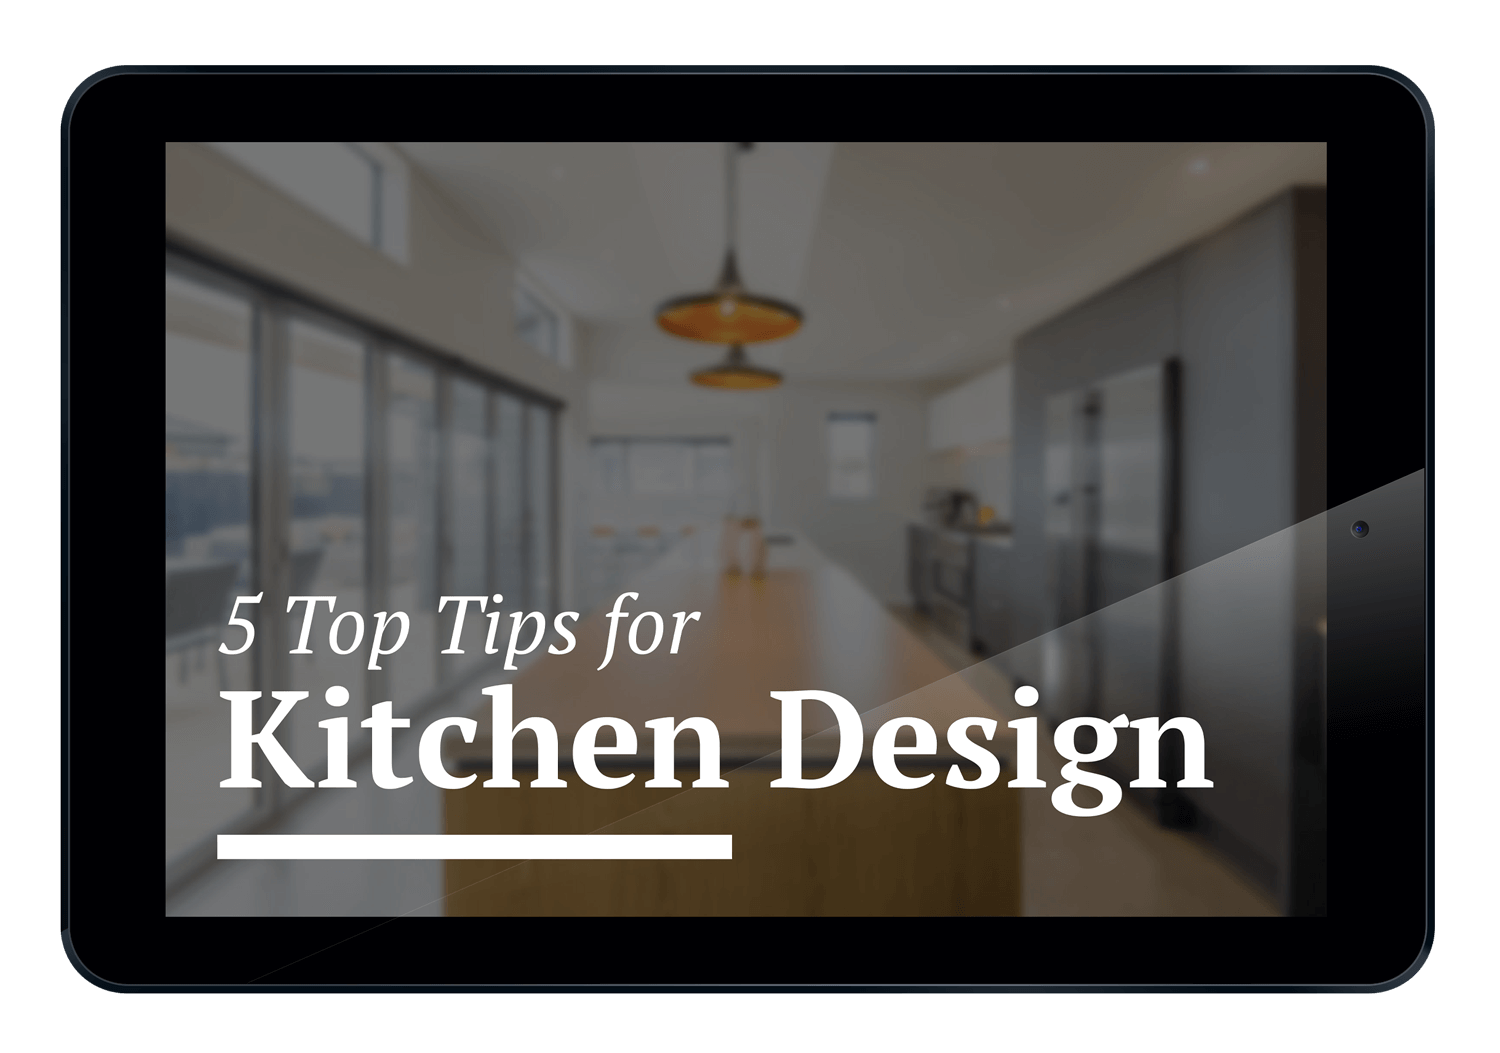 5 Top Tips for Kitchen Design